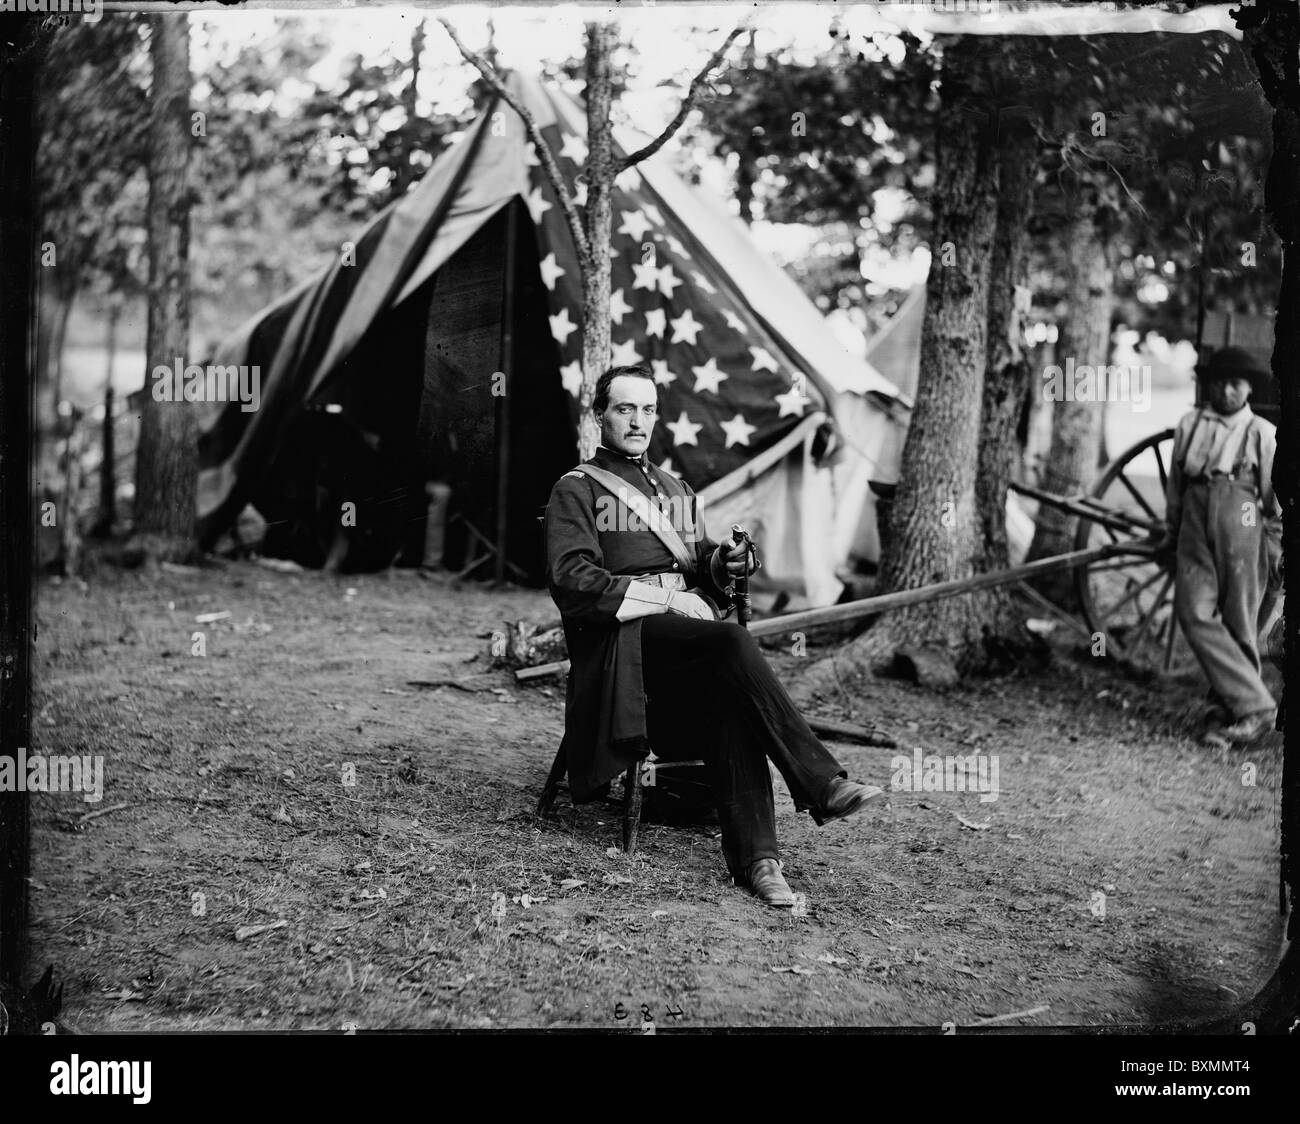 Bealeton, Virginia. Capt. Cunningham of Gen. T.F. Meagher's staff colors union army tent outdoors seated chair officer sitting Stock Photo